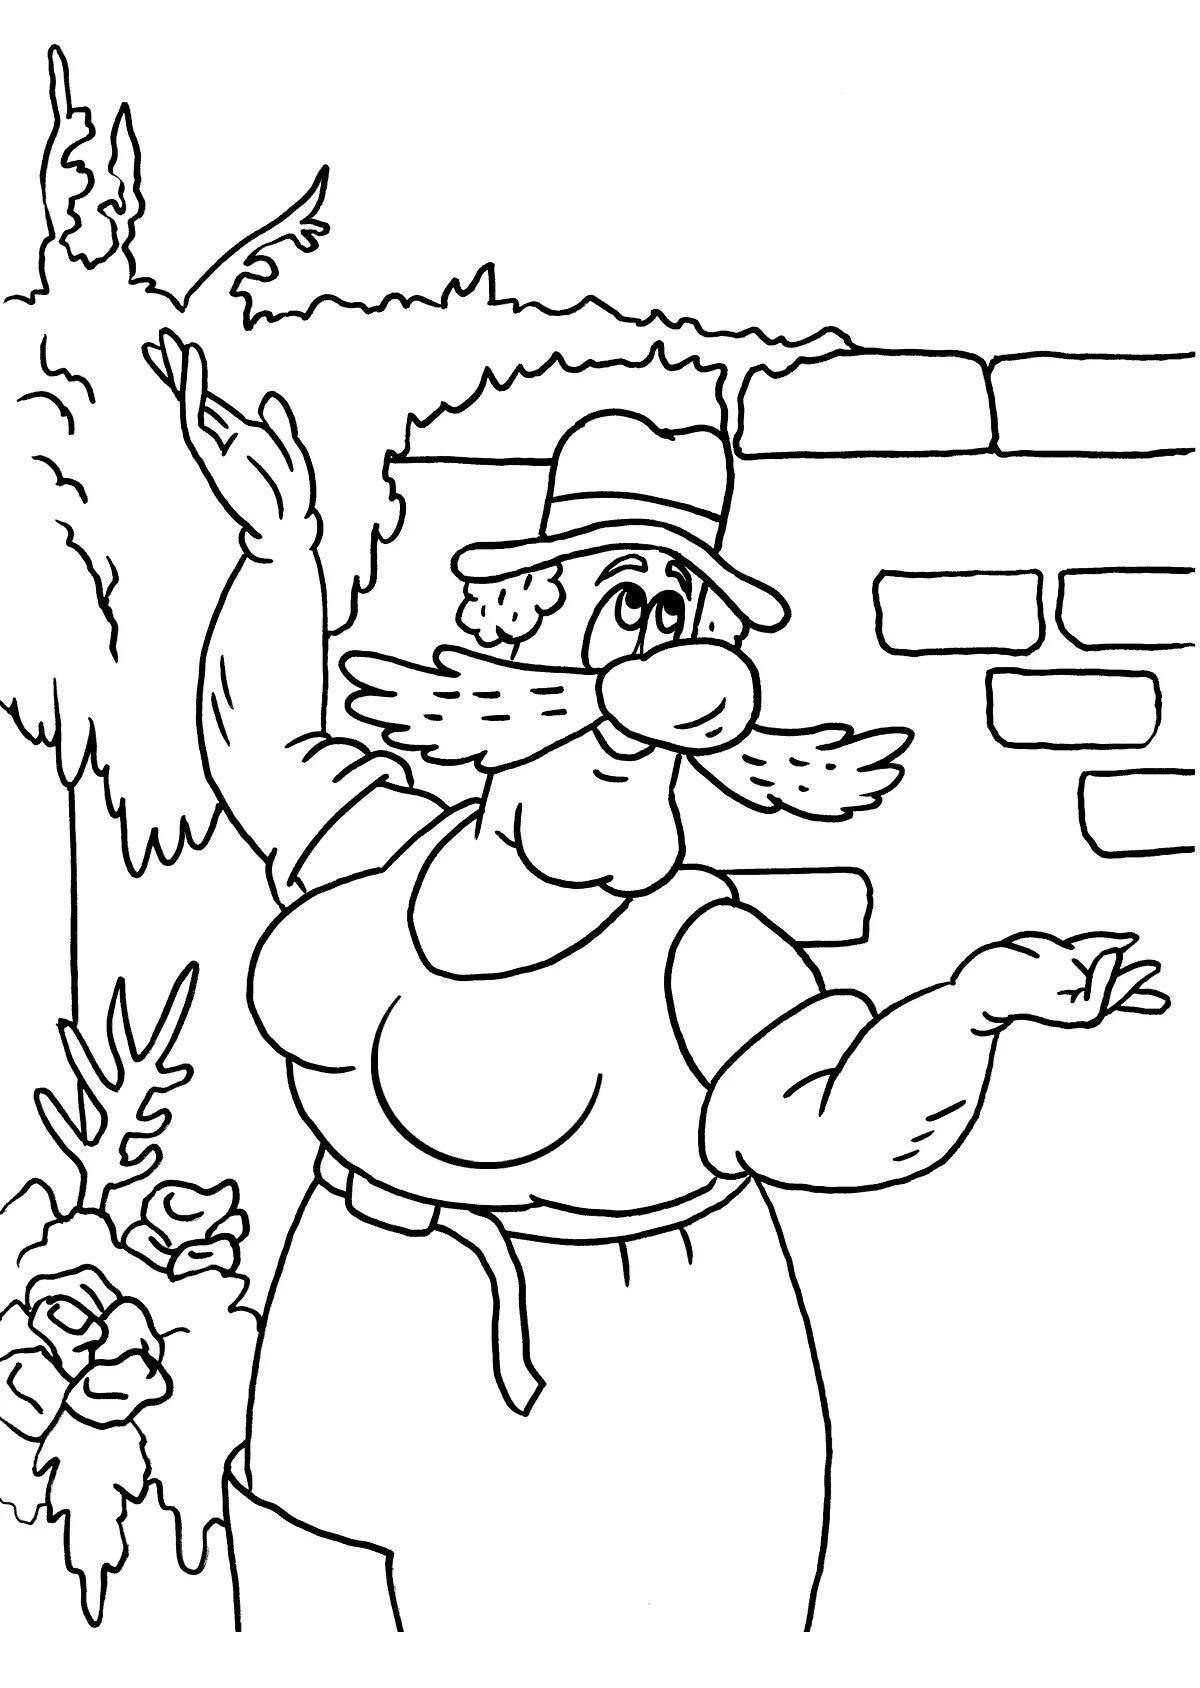 Смелый funky uncle mokus coloring page